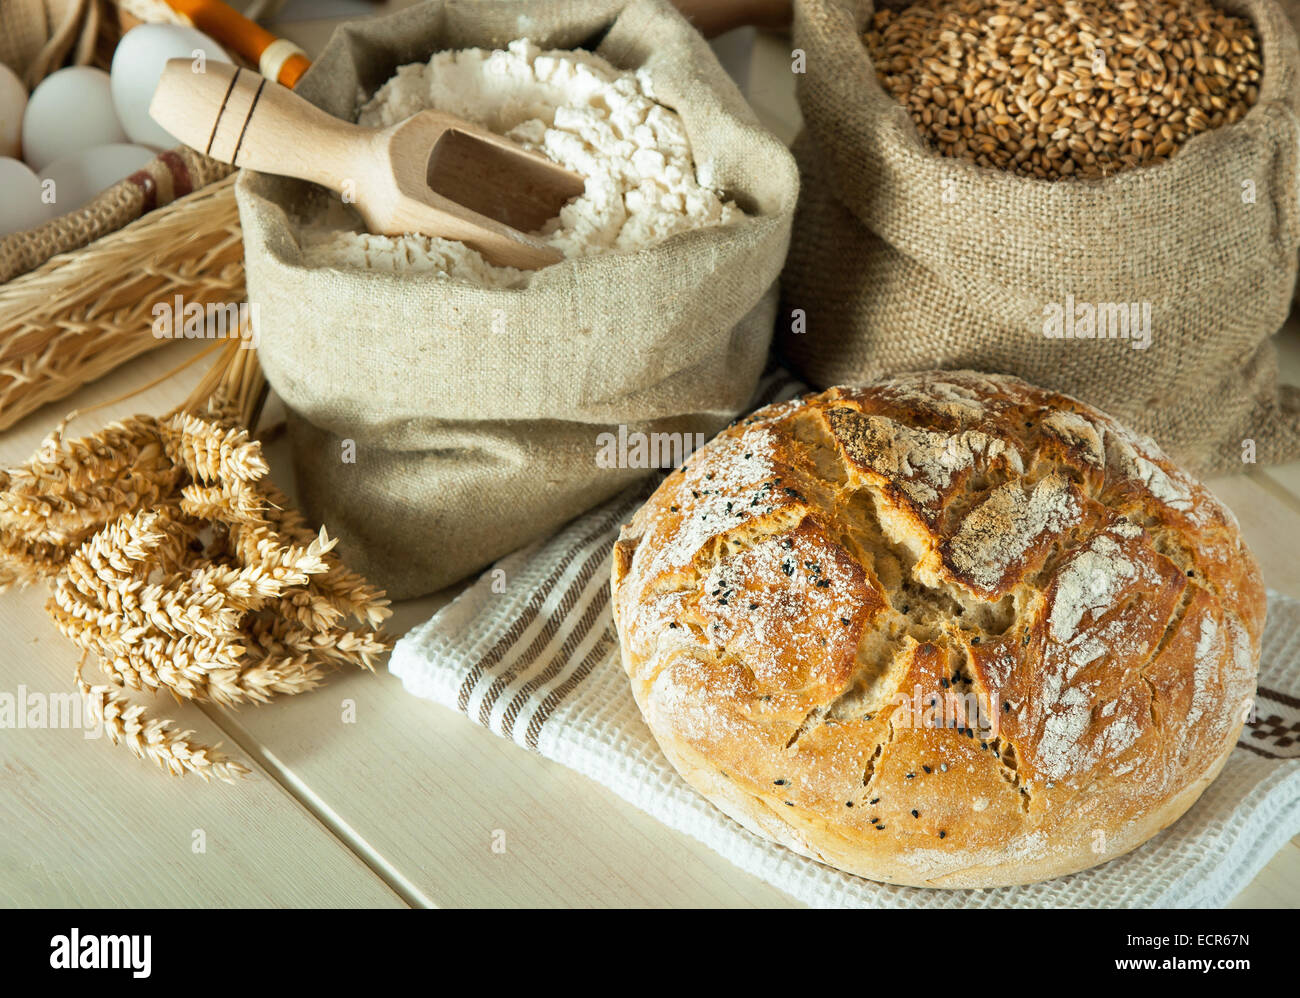 Homemade bread and wheat grain on table. Focus on bread Stock Photo